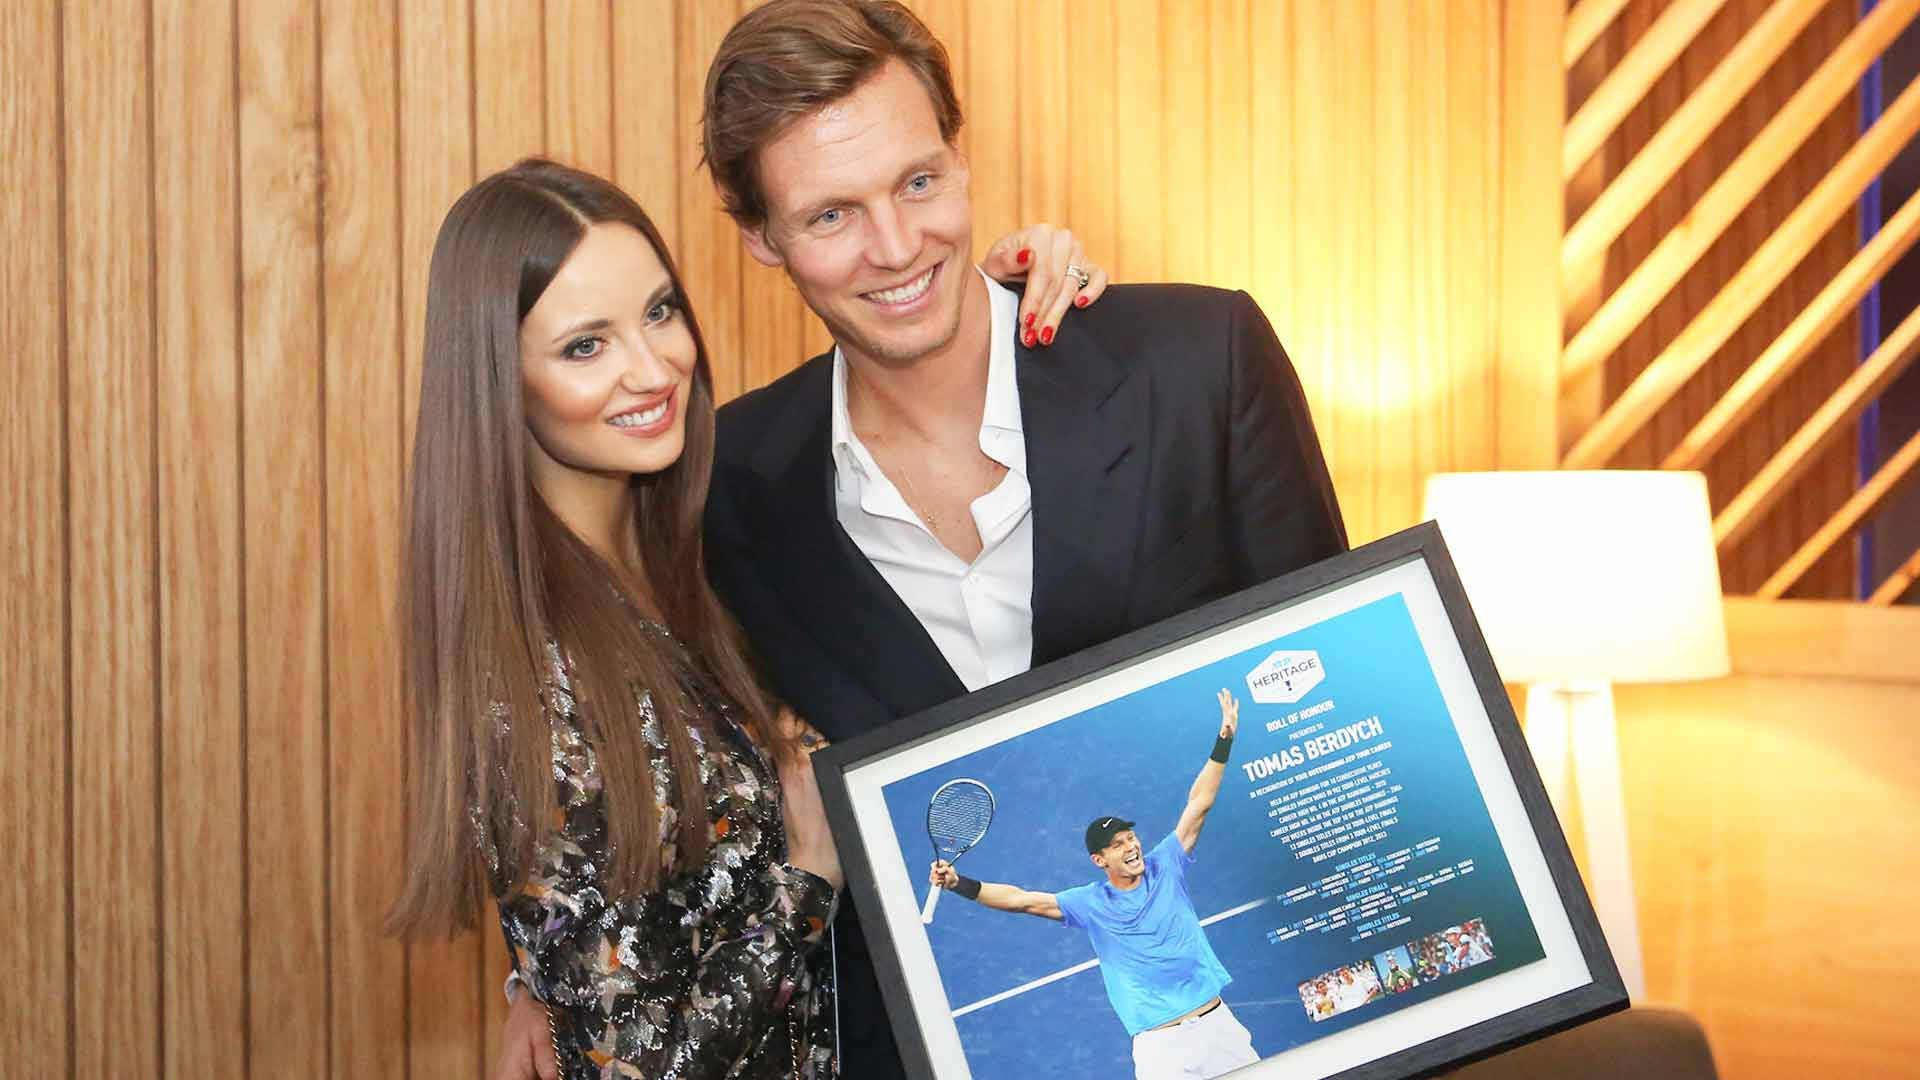 Tomas Berdych With His Wife Wallpaper